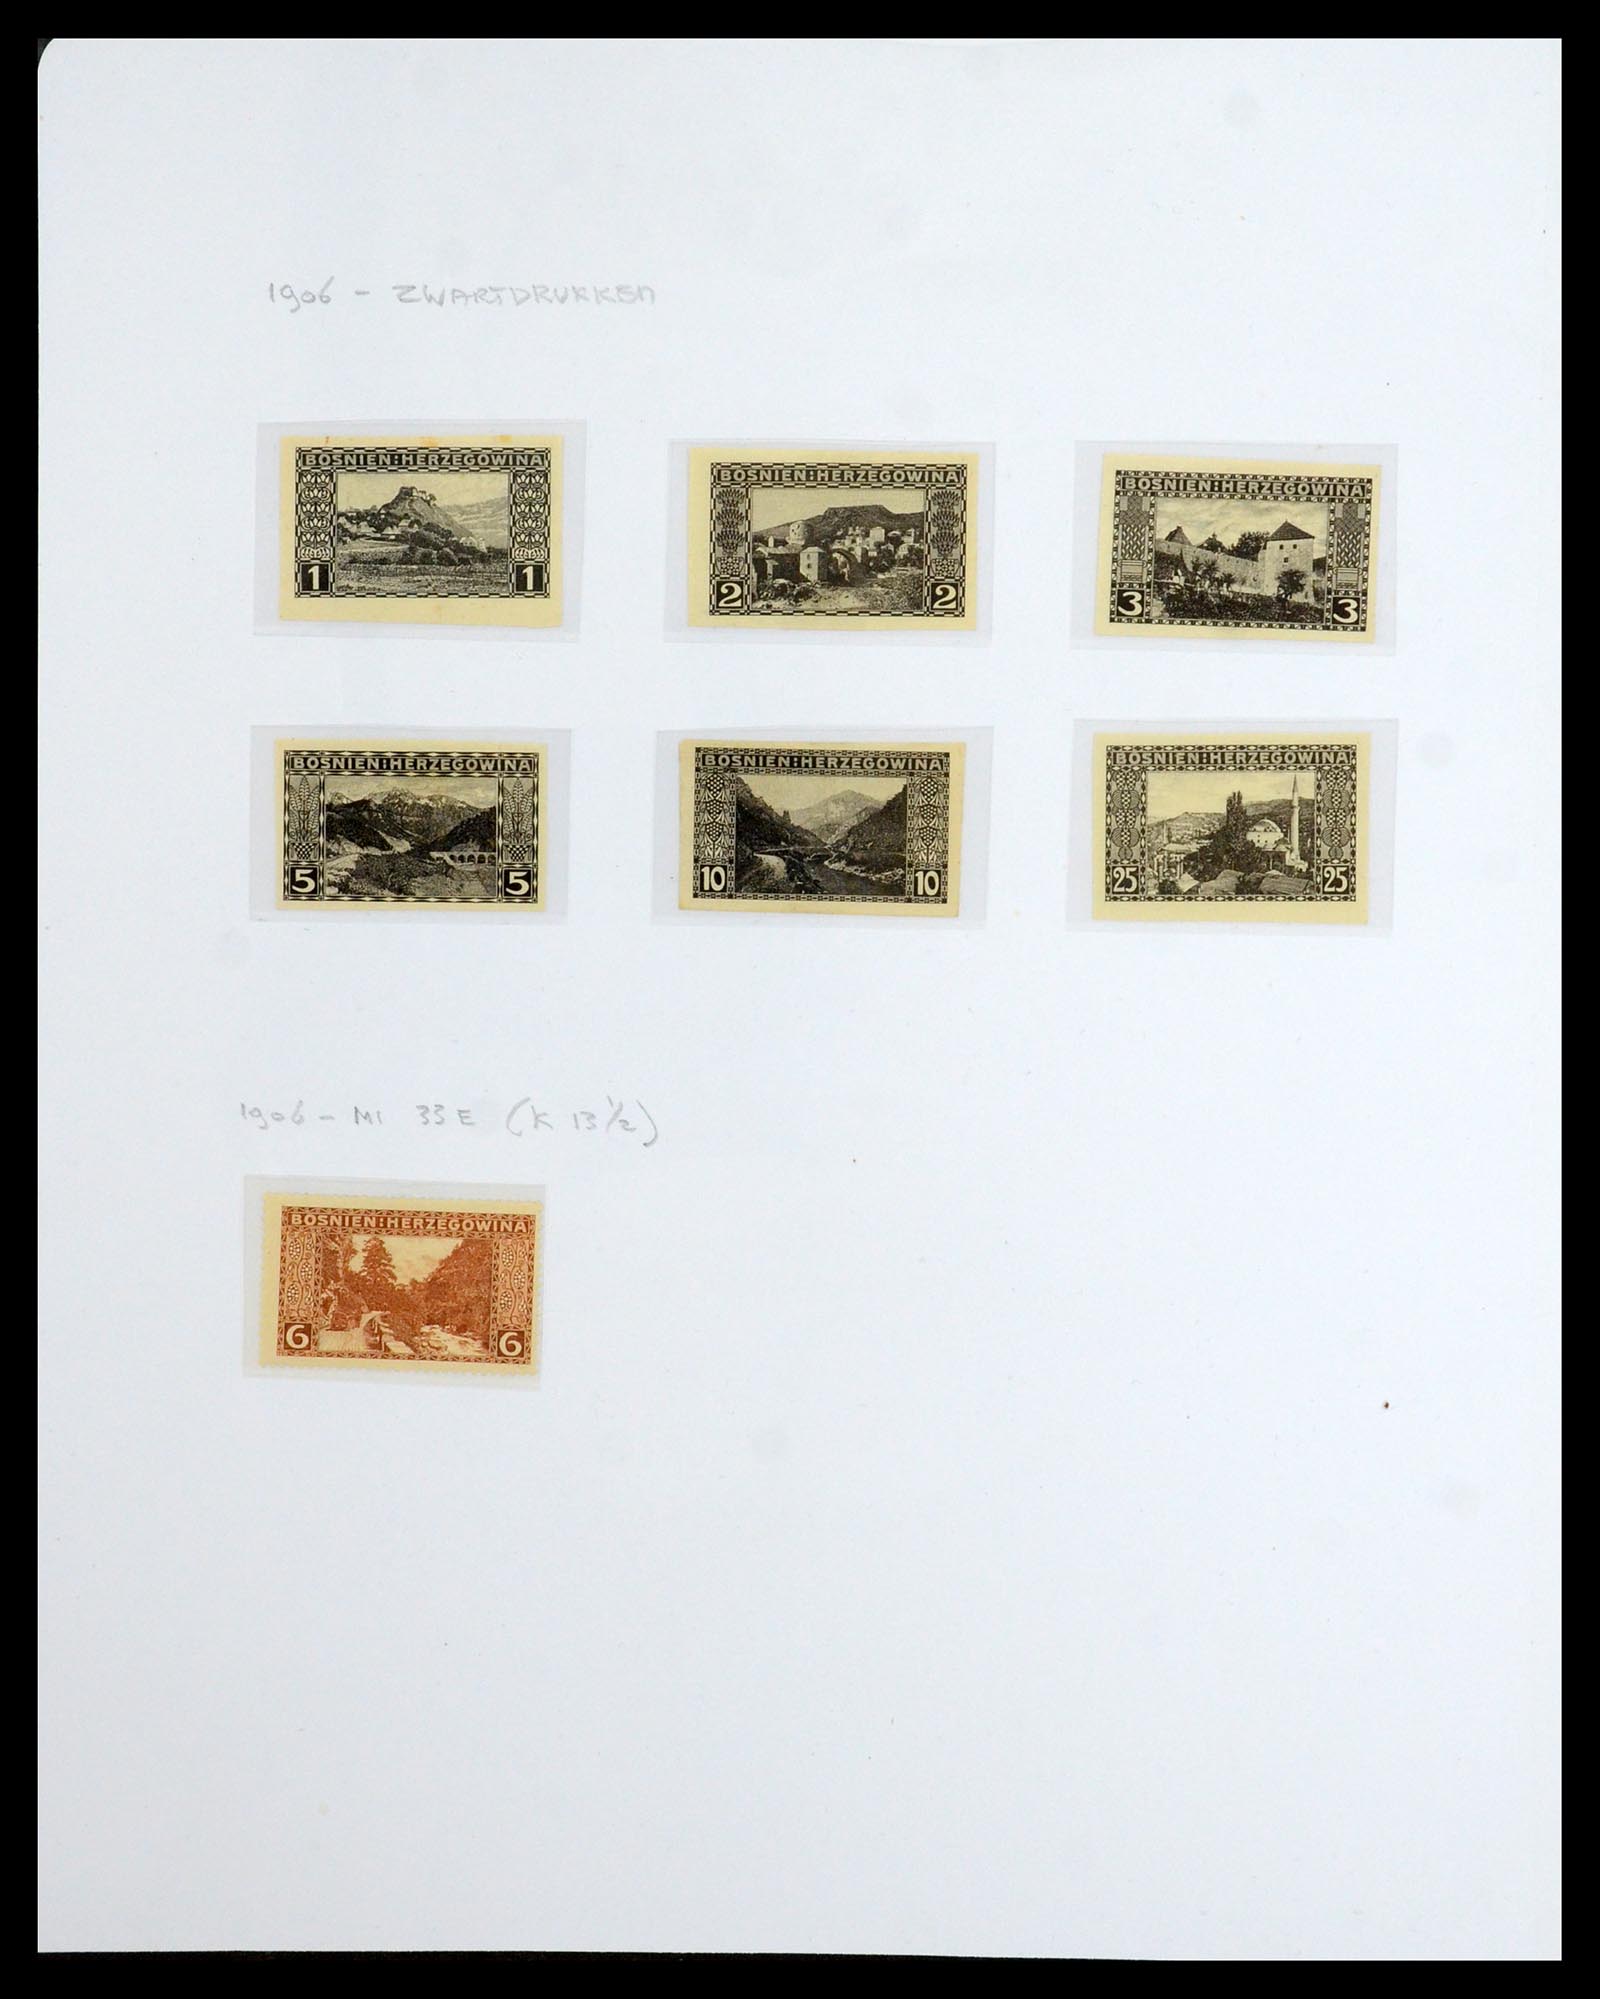 36364 005 - Stamp collection 36364 Austrian territories 1879-1918.